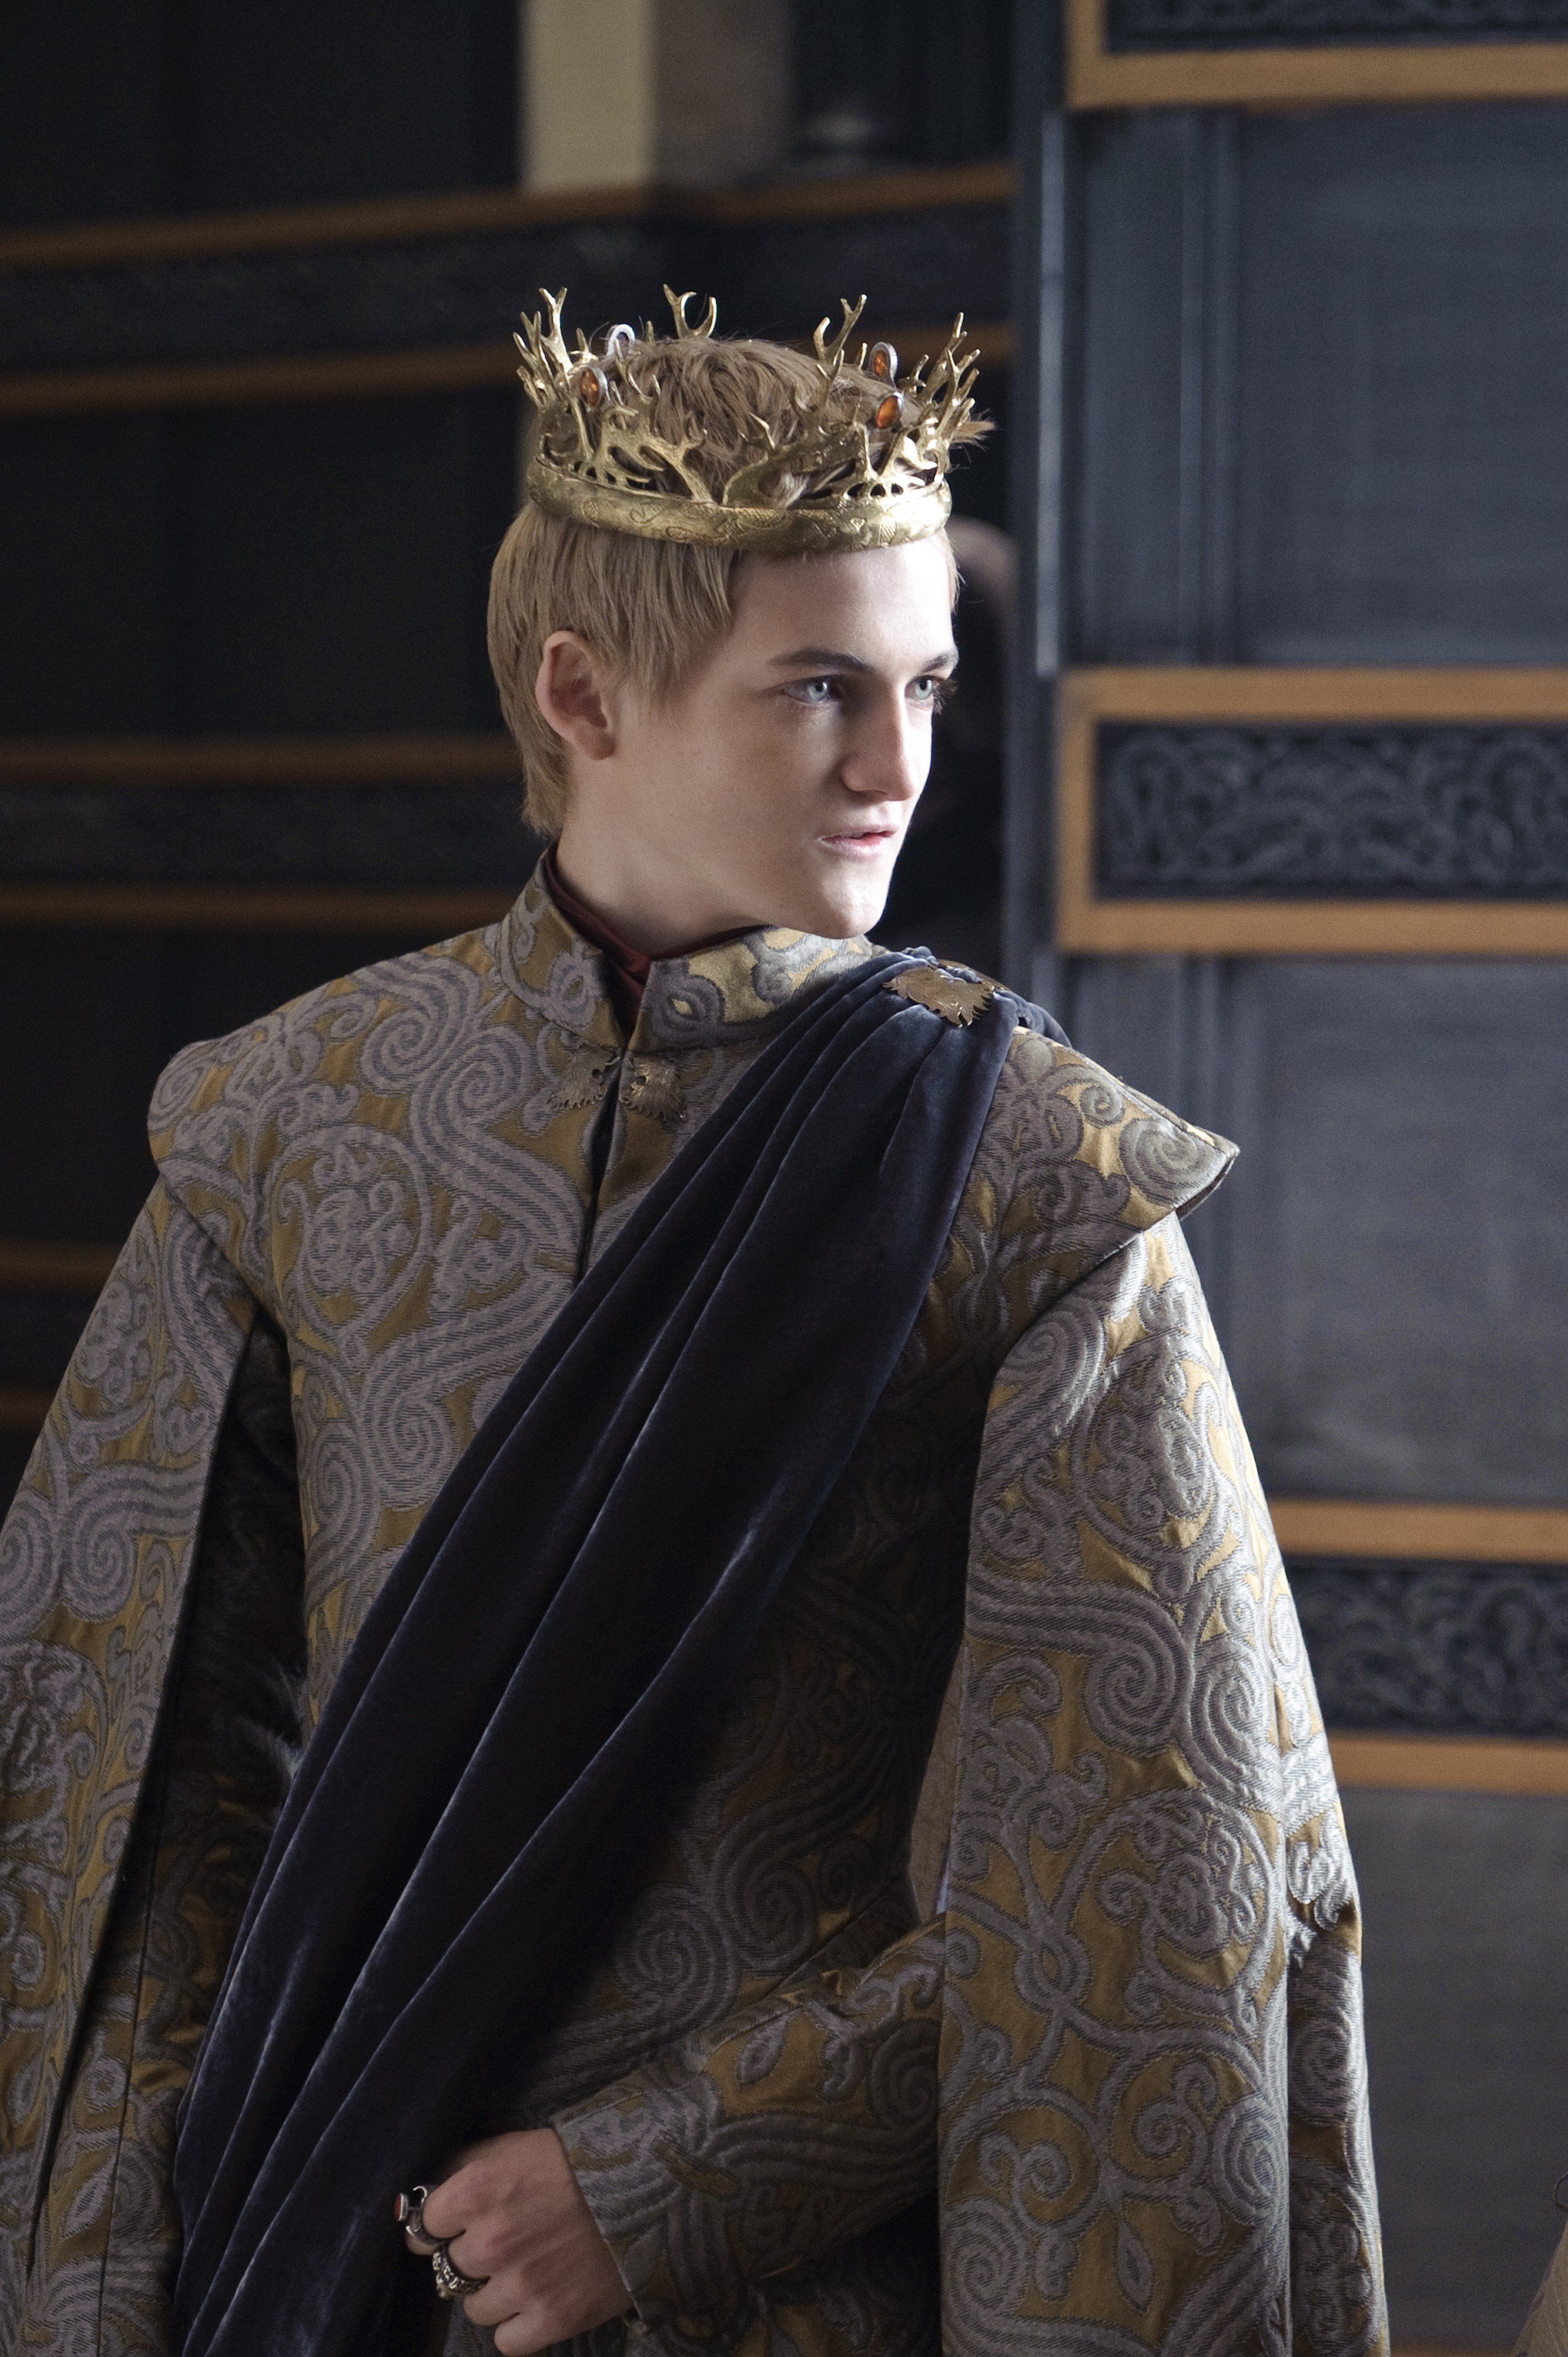 image from game of thrones Search. Joffrey baratheon, Game of thrones costumes, King joffrey